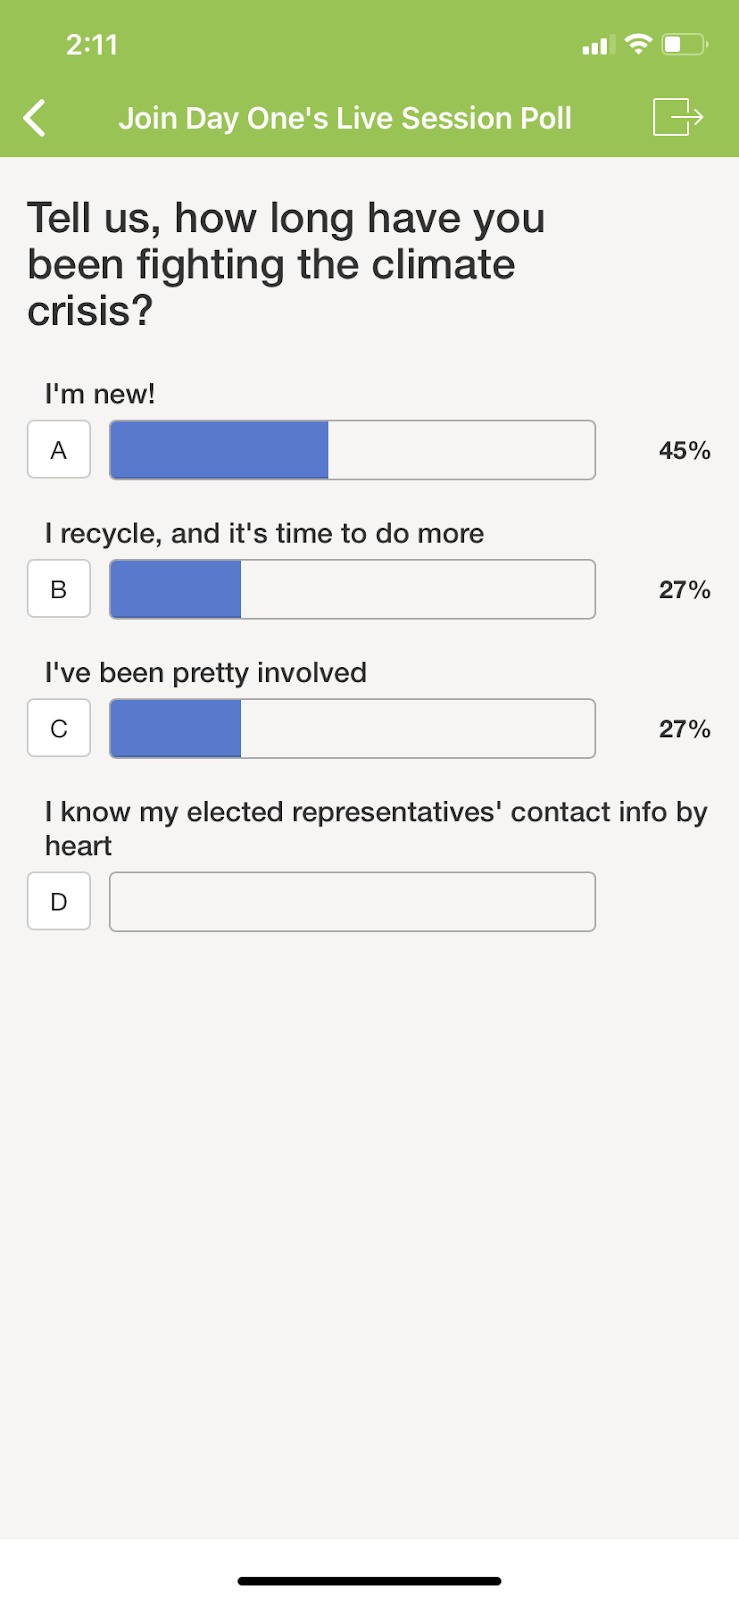 Image of event mobile app poll question asking how long have you been fighting the climate crisis?